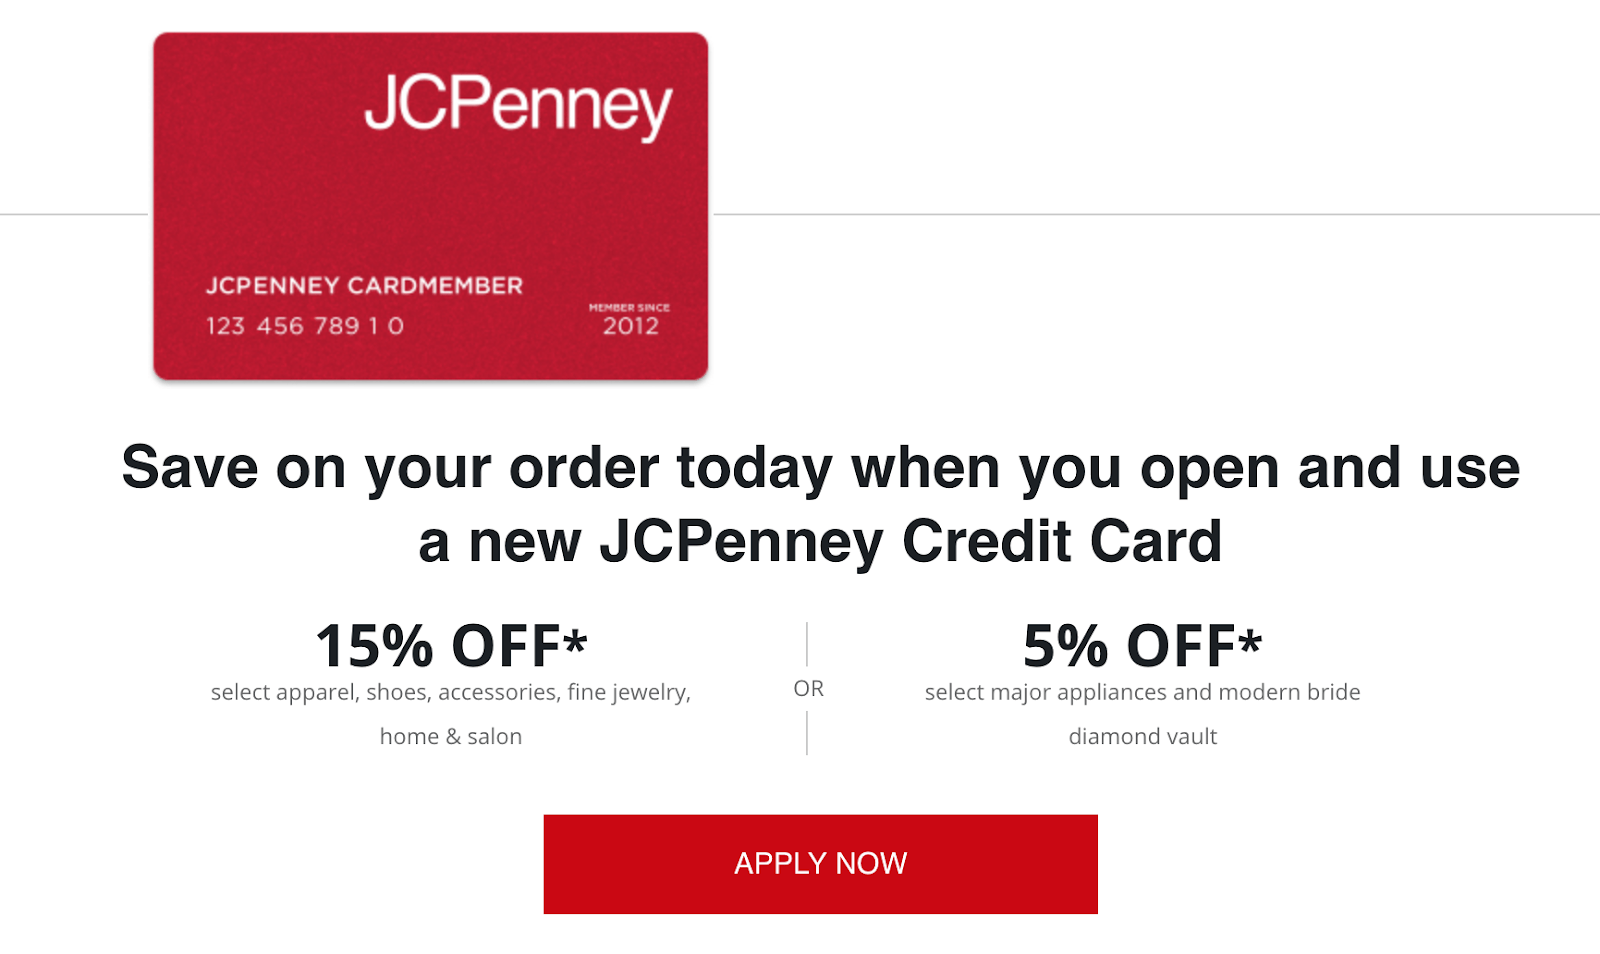 App to Apply for a JCPenney Credit Card - Learn How to Download and Use